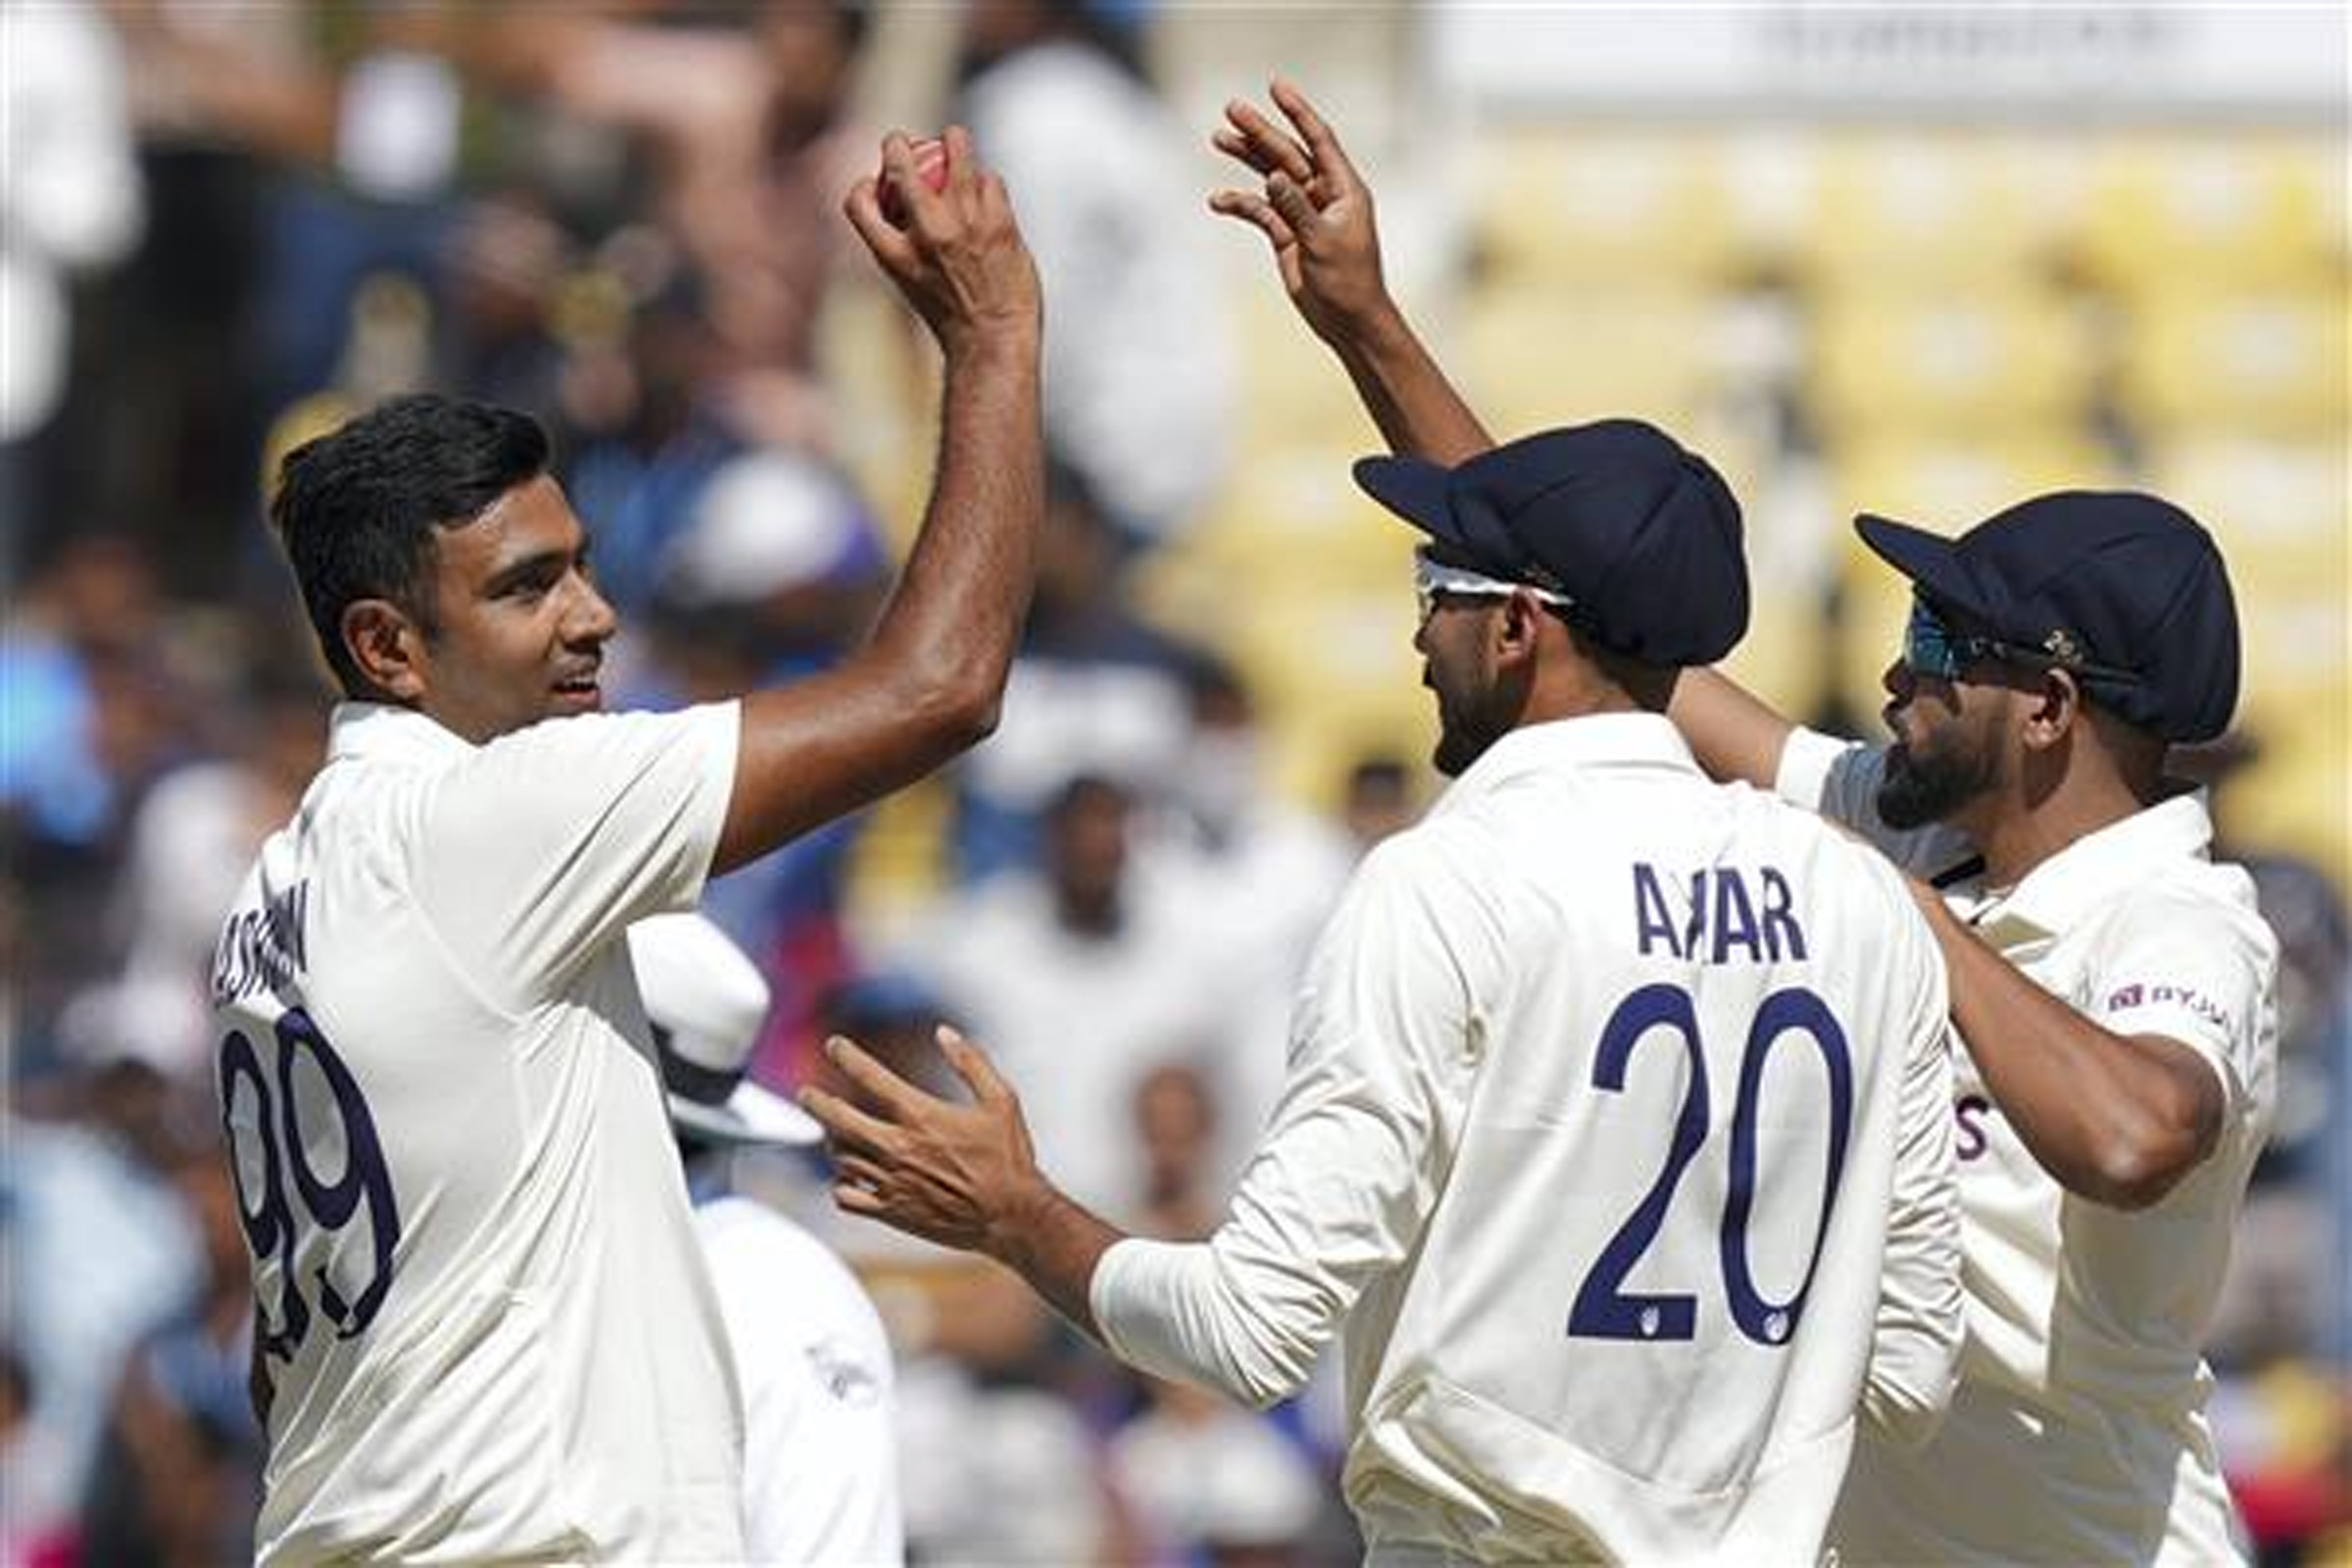 India Thrash Australia By An Innings And 132 Runs In First Test